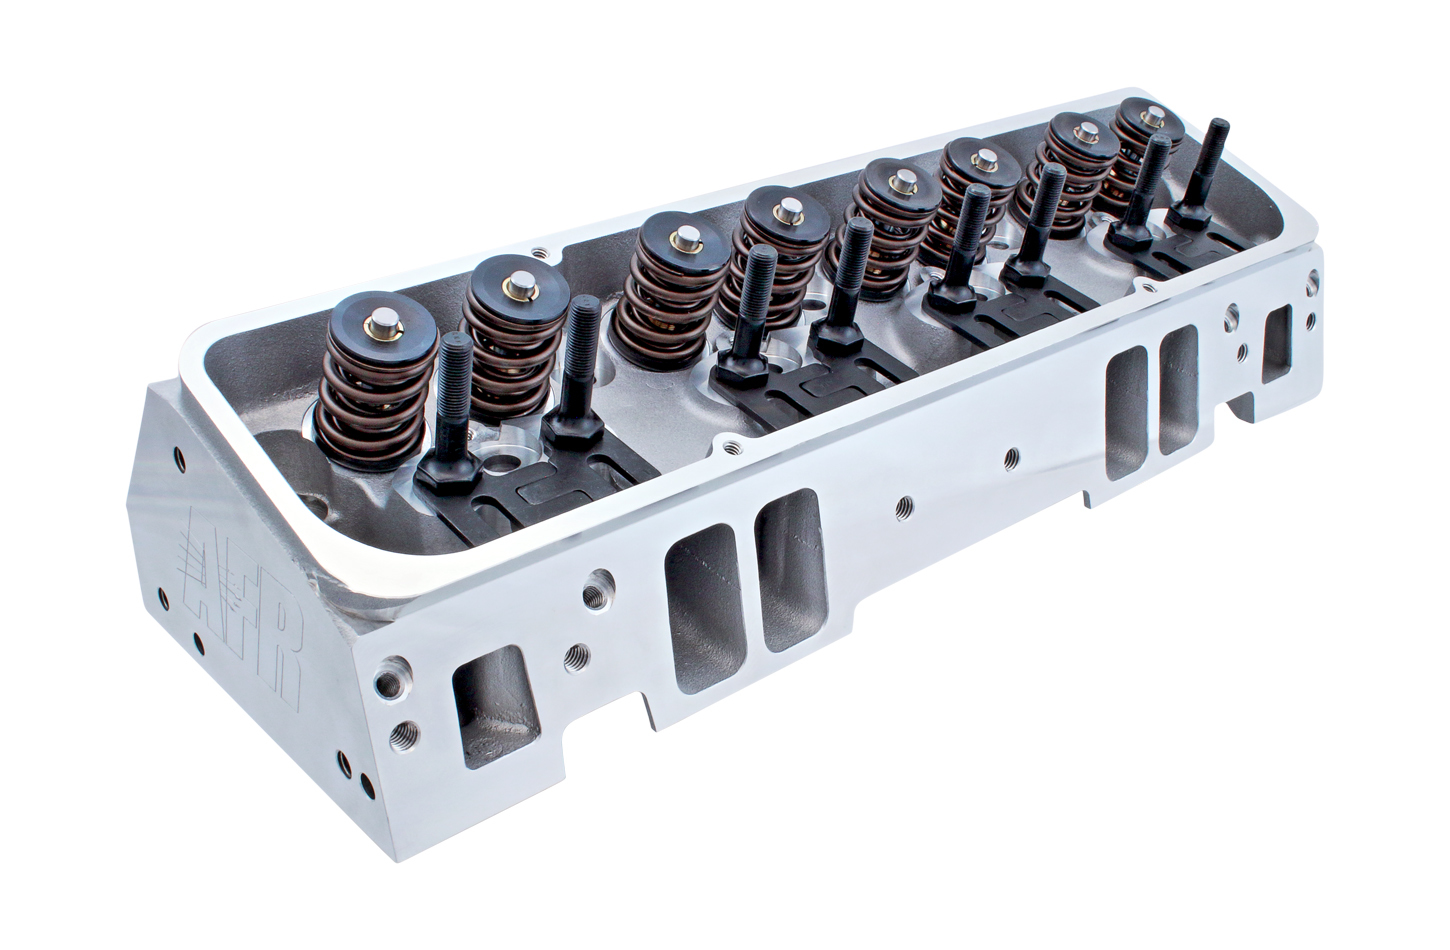 Air Flow Research 1006 Cylinder Head, Enforcer, Assembled, 2.020 / 1.600 in Valves, 195 cc Intake, 64 cc Chamber, 1.290 in Springs, Angle Plug, Aluminum, Small Block Chevy, Each